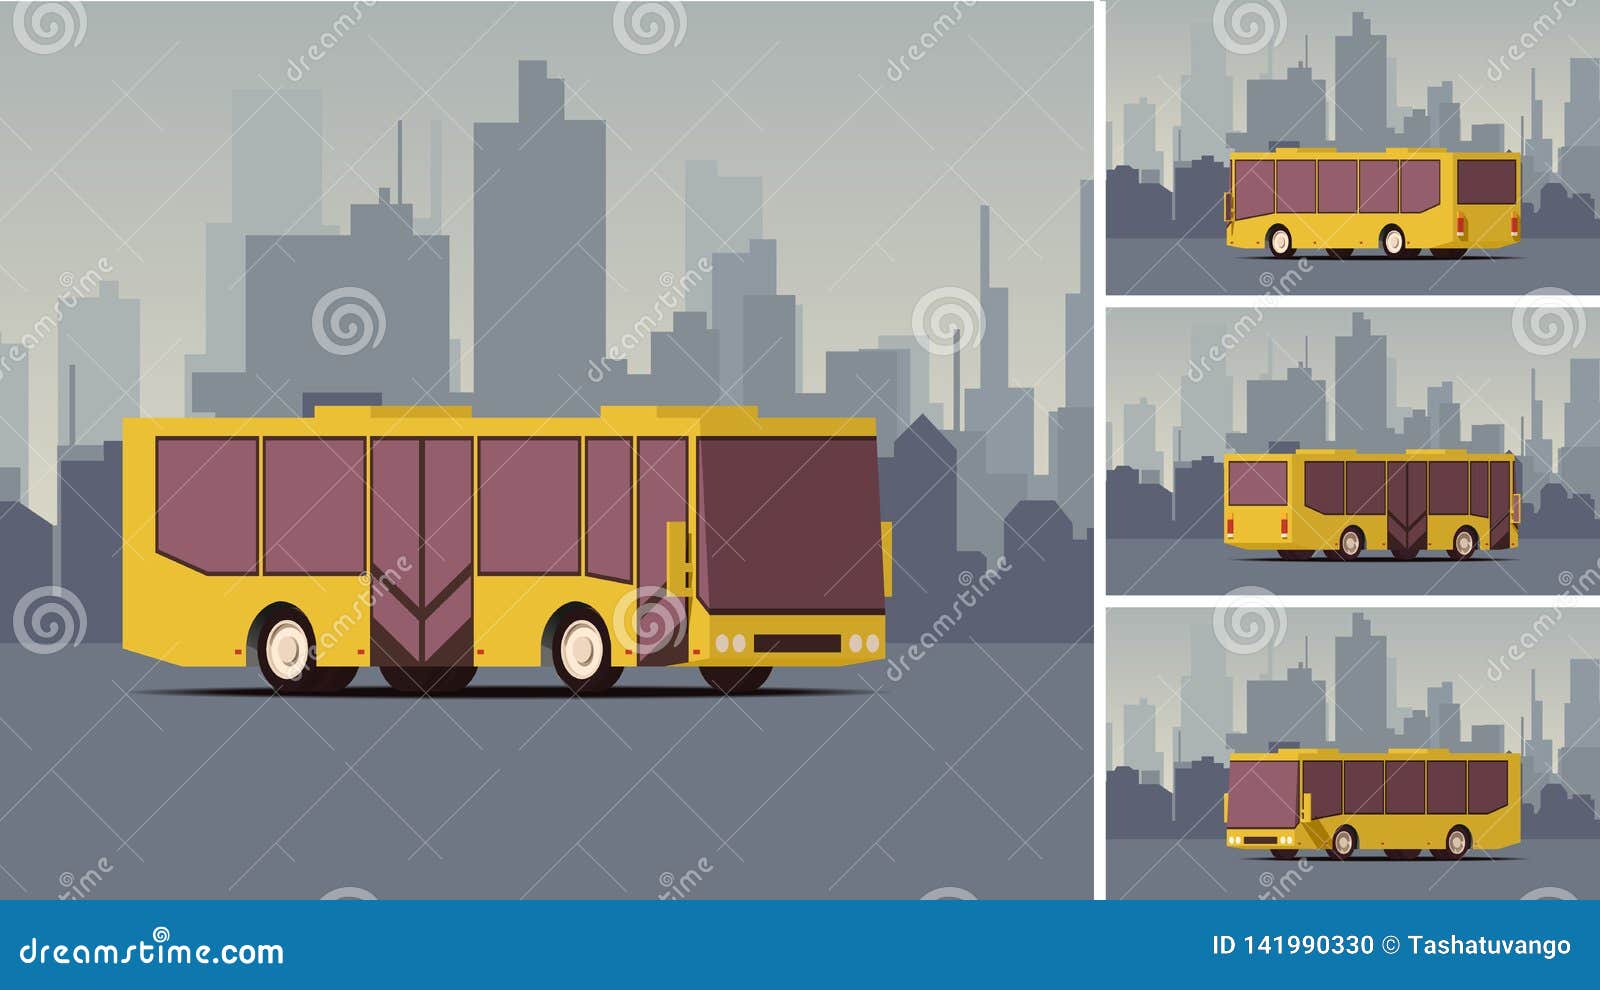 side view autobus or public transport with city landscape on the background.